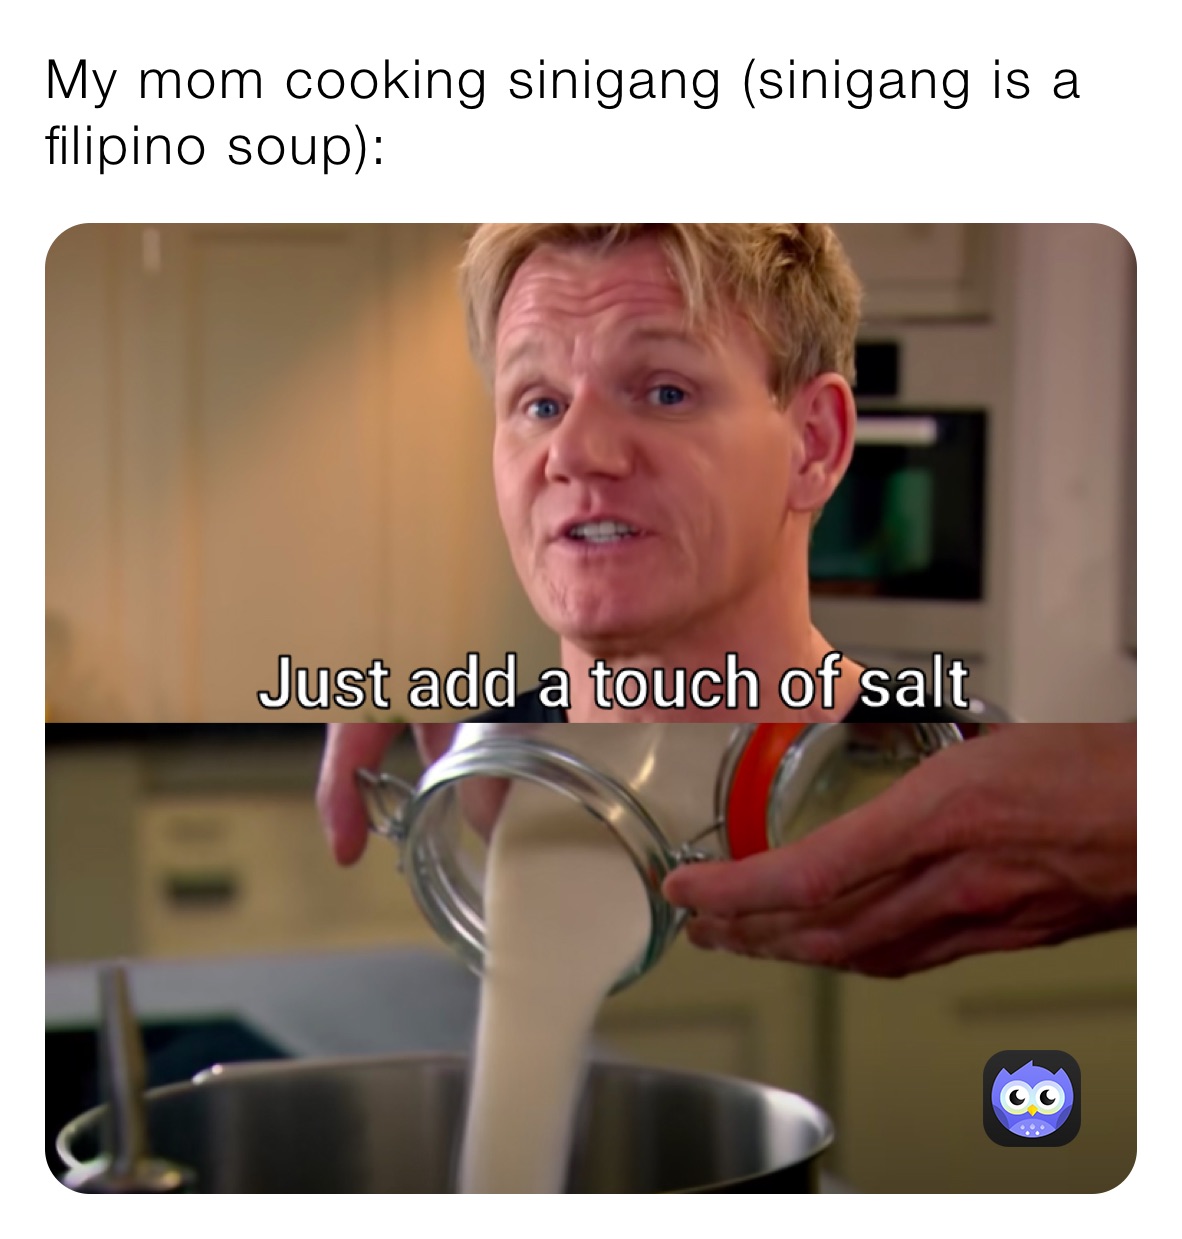 My mom cooking sinigang (sinigang is a filipino soup):